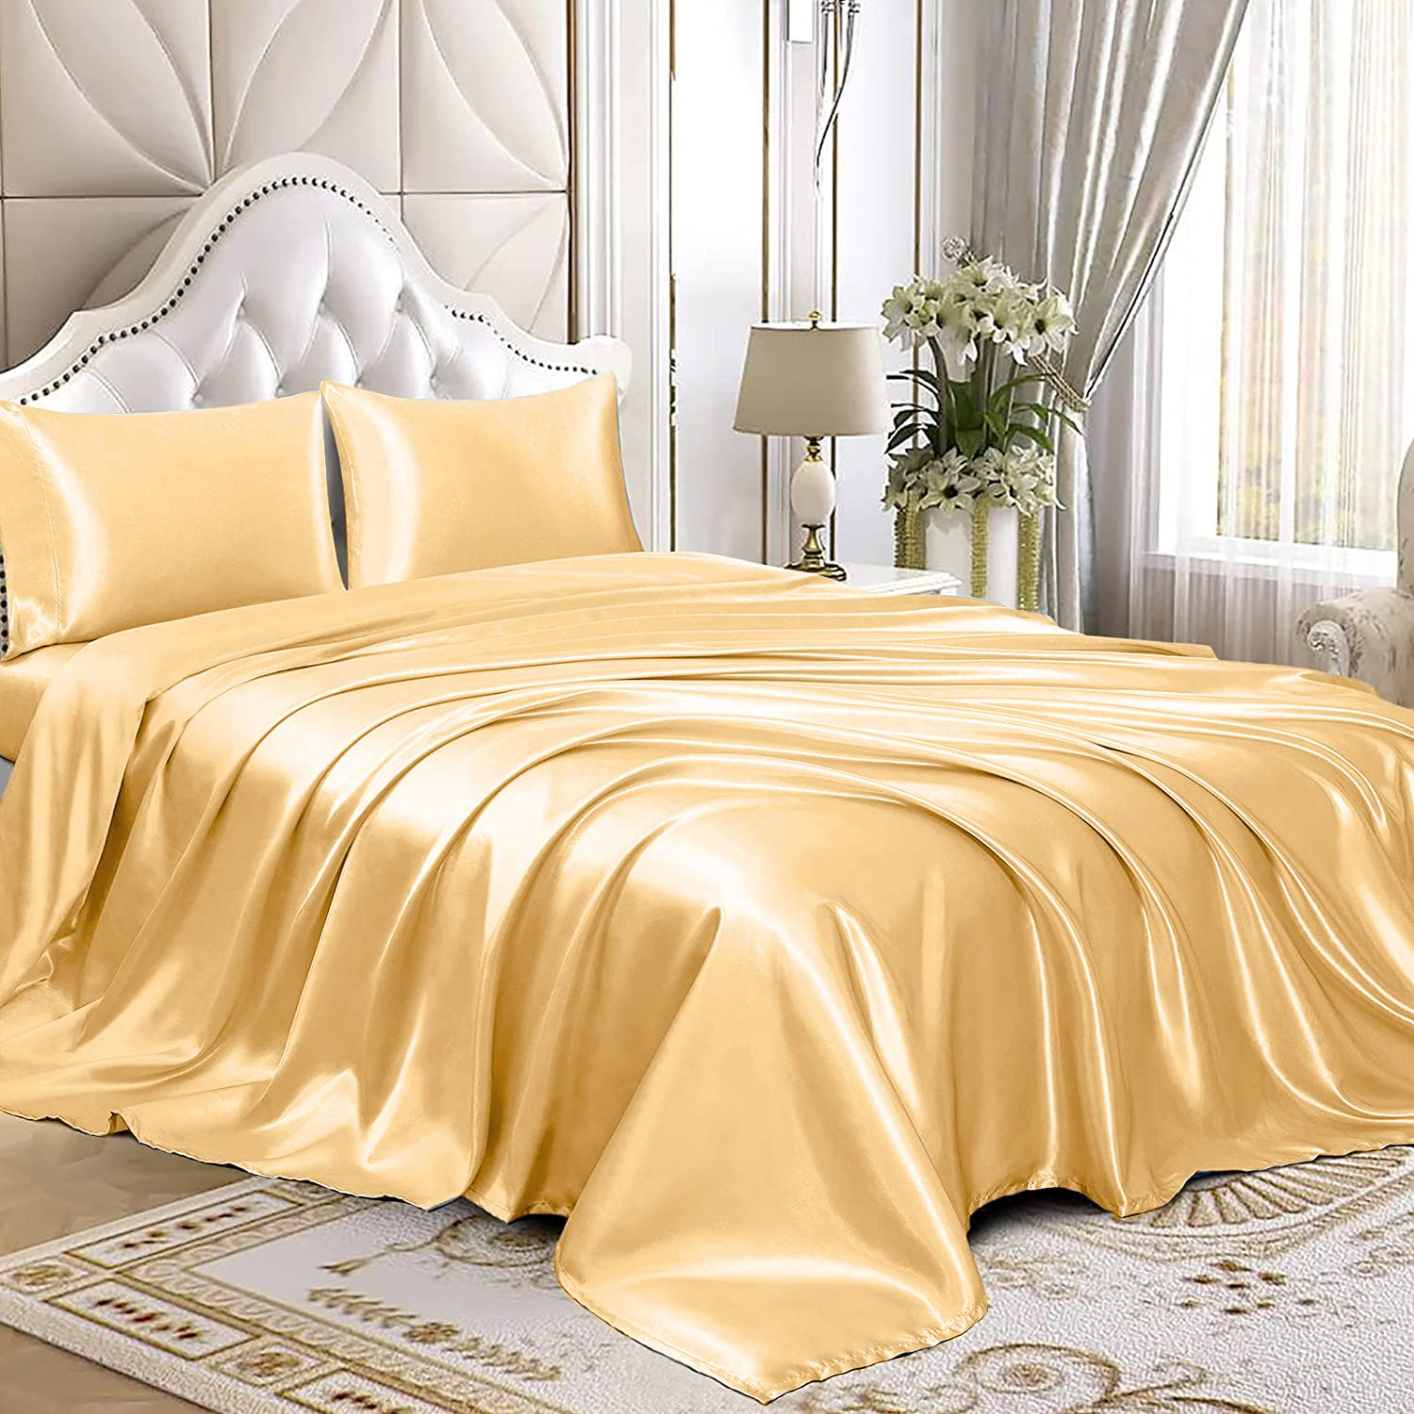 JT013-13 Bed Sheets Brushed Microfiber Sheets Extra Soft Bed Set Fade Resistant Easy Care 4Pcs Sheets
